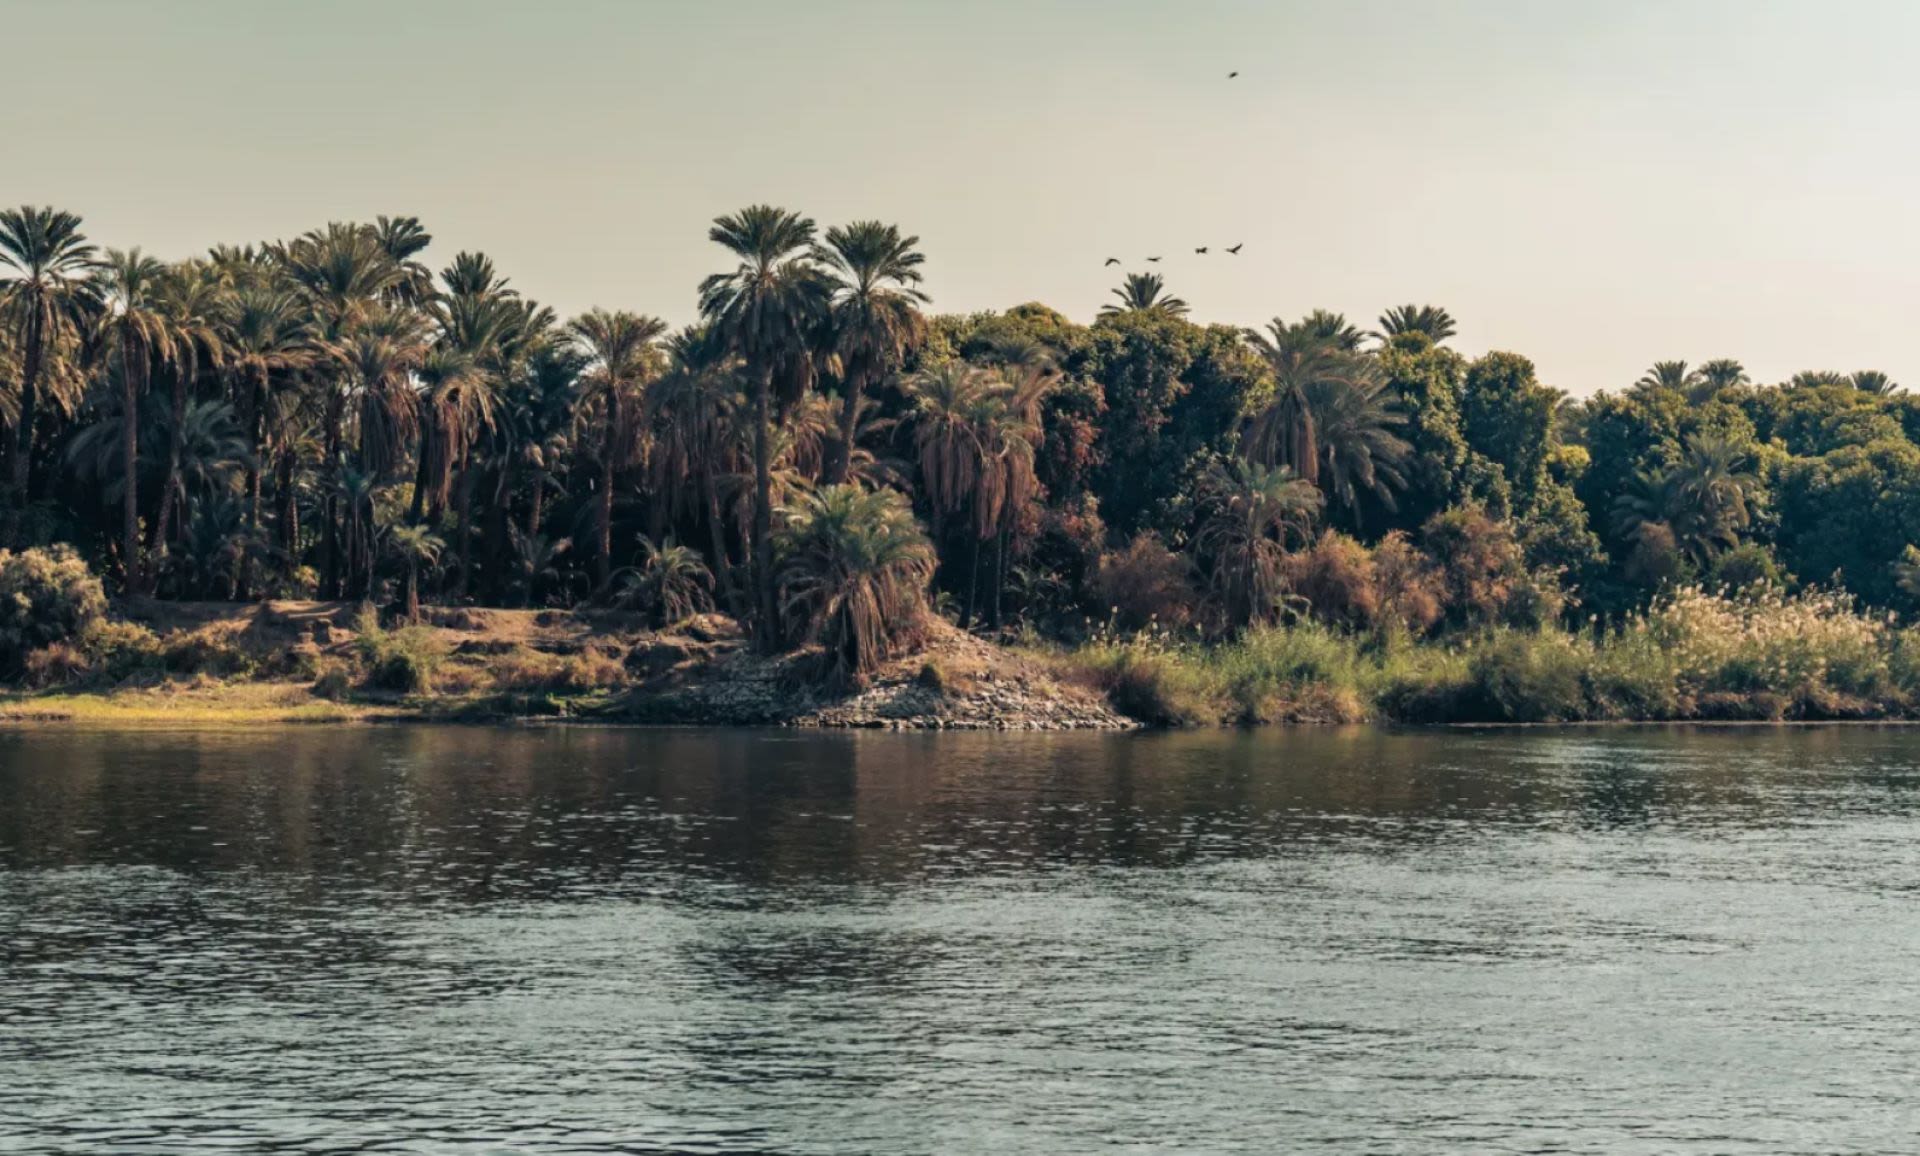 Researcher finds microplastics in digestive tracts of fish from Nile River — here's why it's concerning